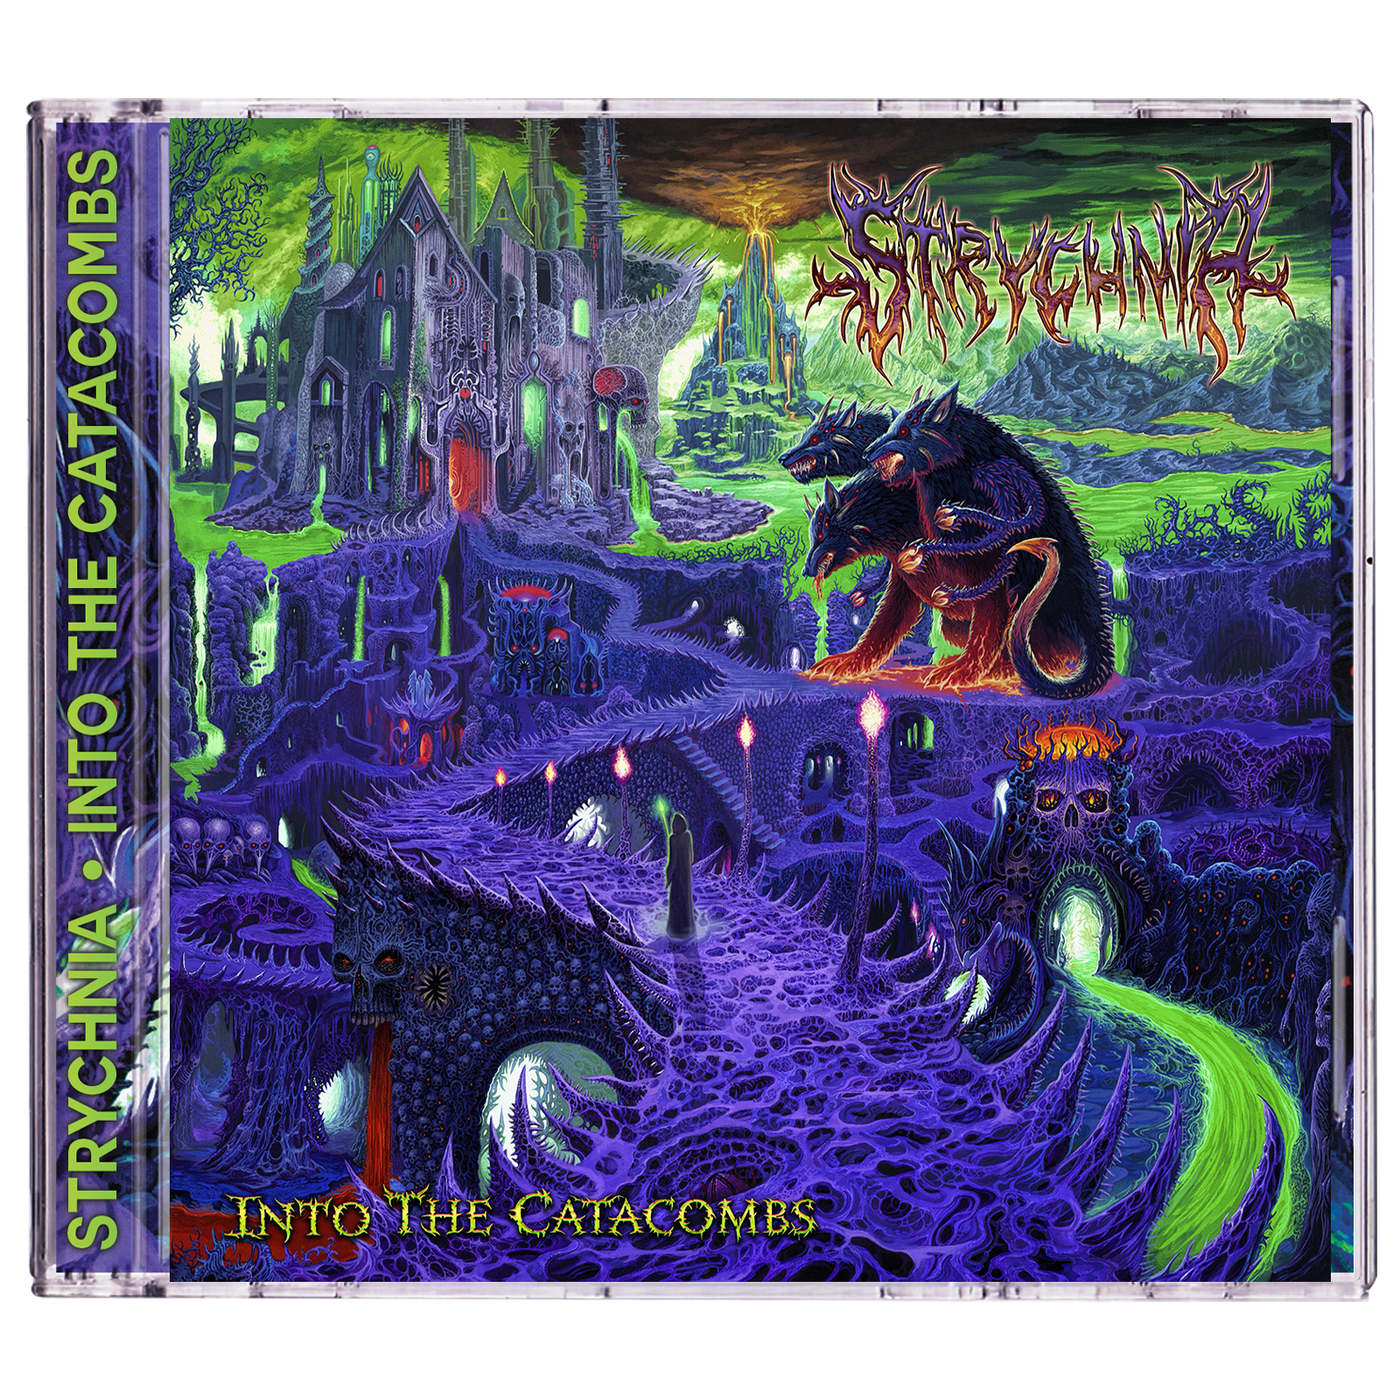 Strychnia 'Into The Catacombs' CD